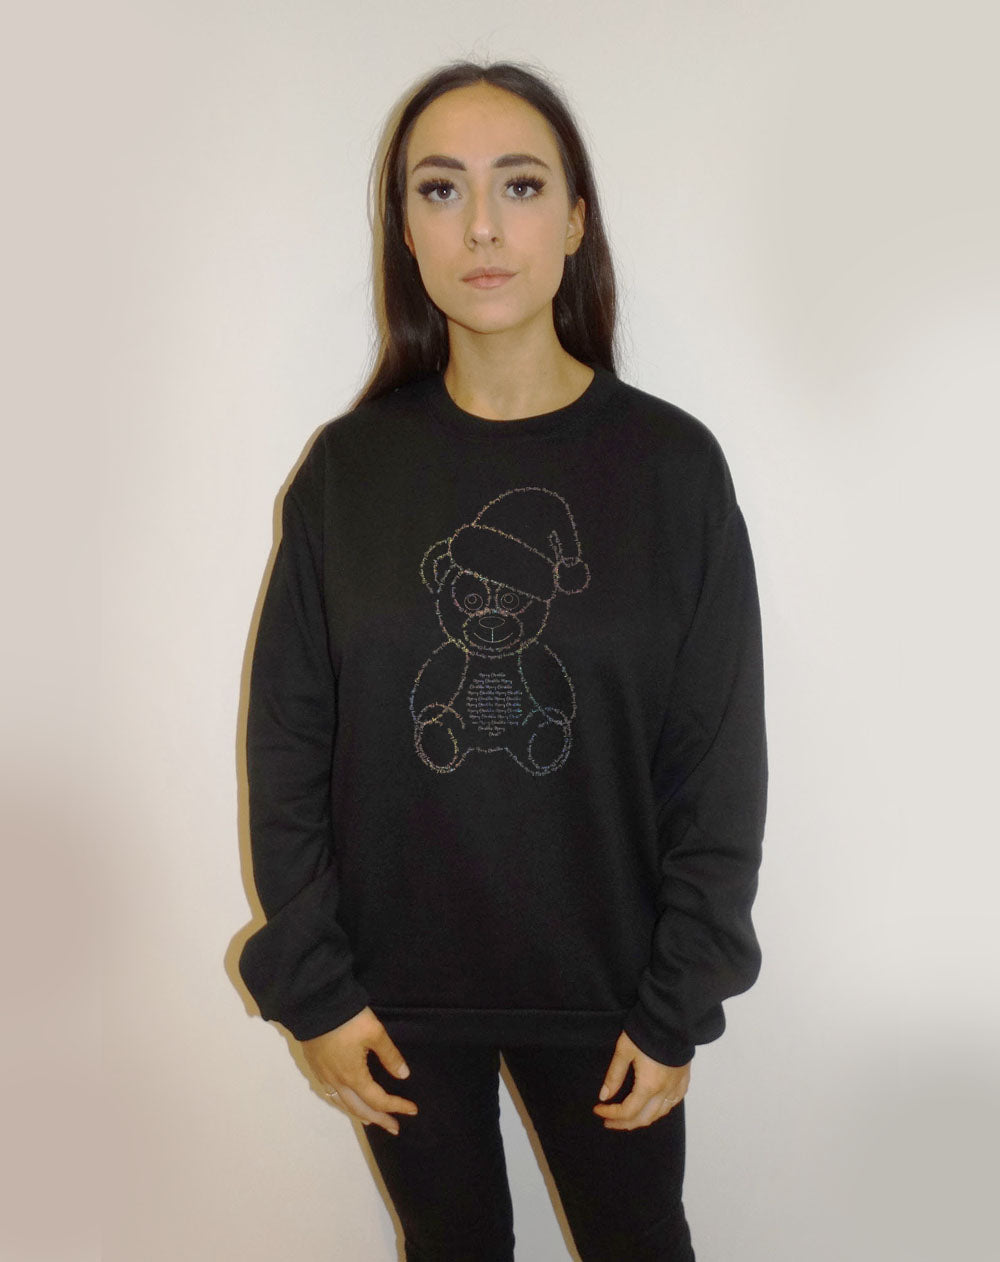 Black Christmas Jumper With  Festive Font Teddy Claus